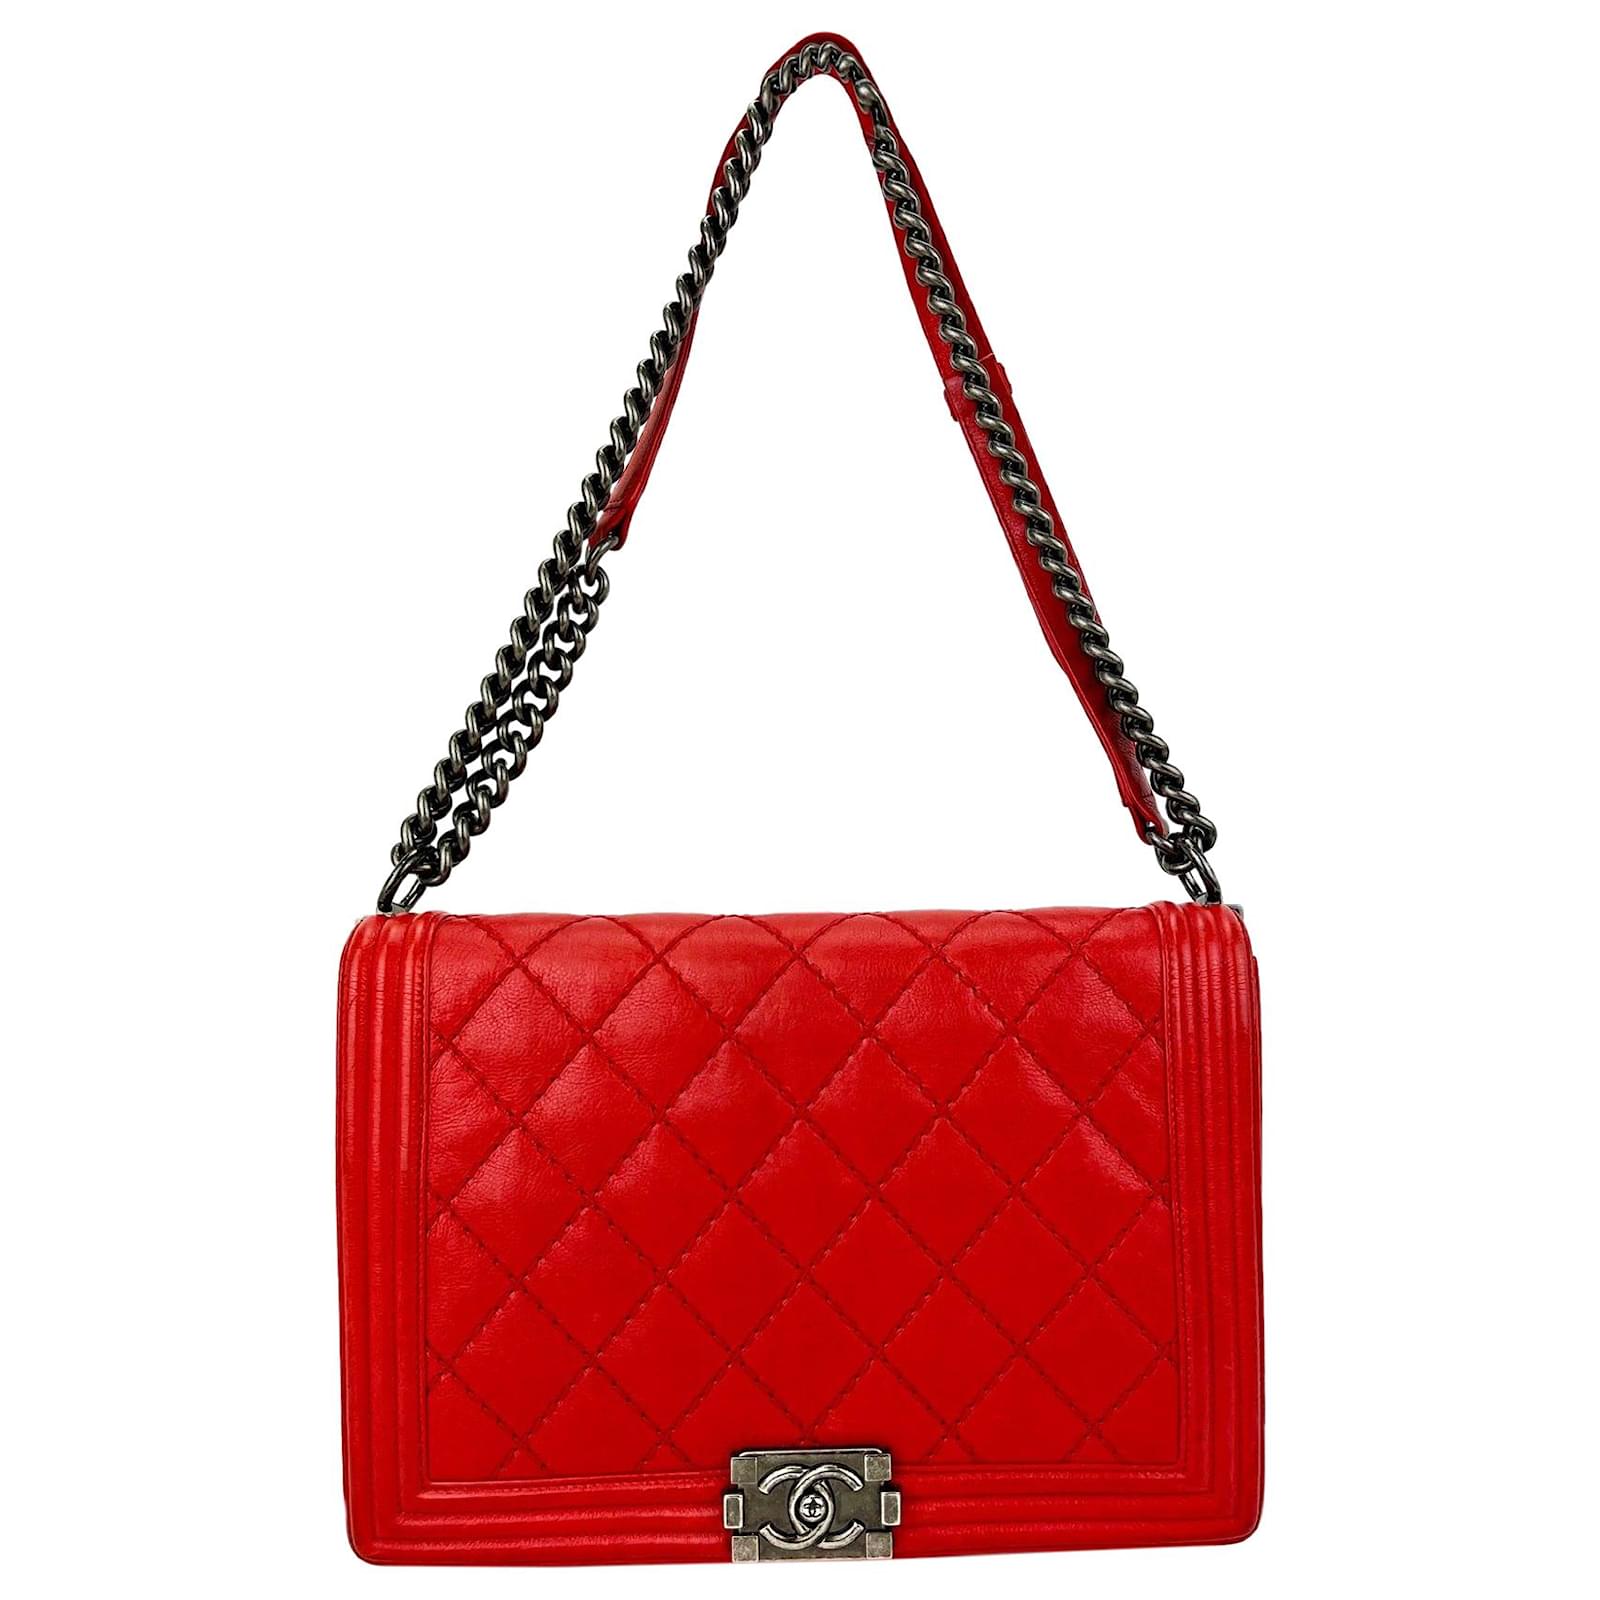 Handbags Chanel Chanel Handbag Quilted Stitch Large Flap Red CC Leather Shoulder Hand Bag Preowned